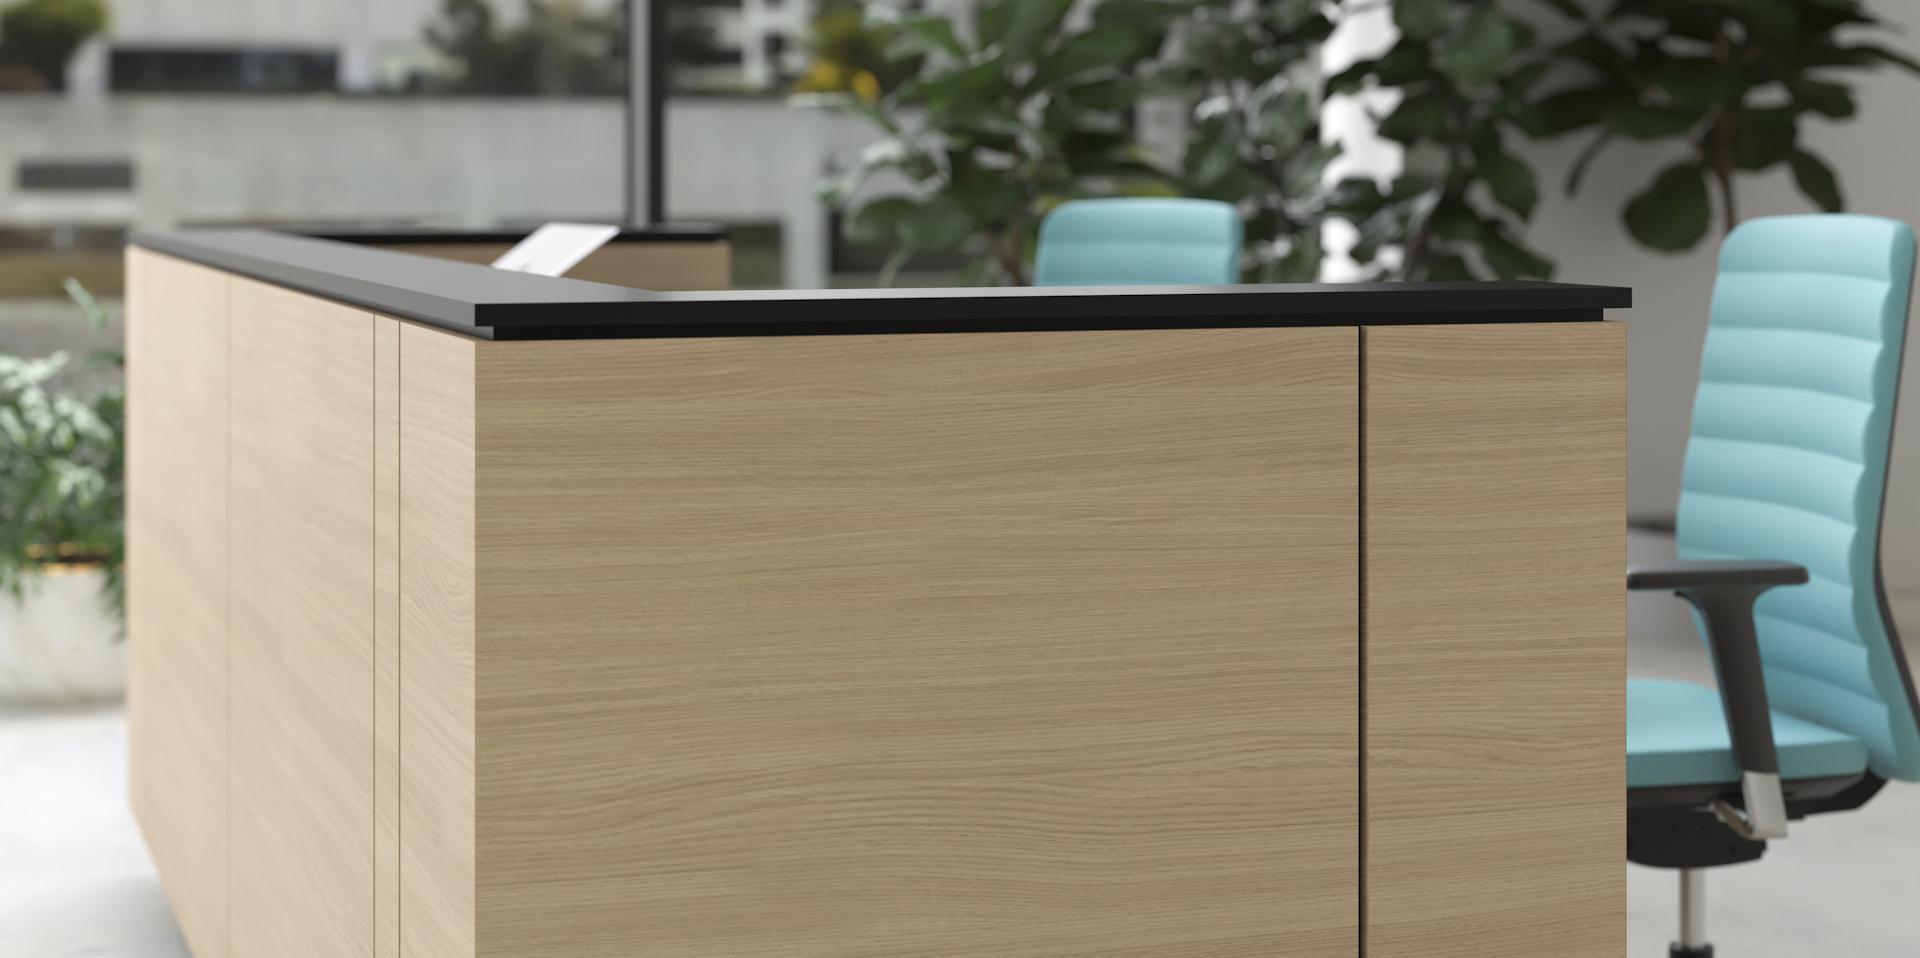 Ice Reception desk offers clean lines and minimalist aesthetic